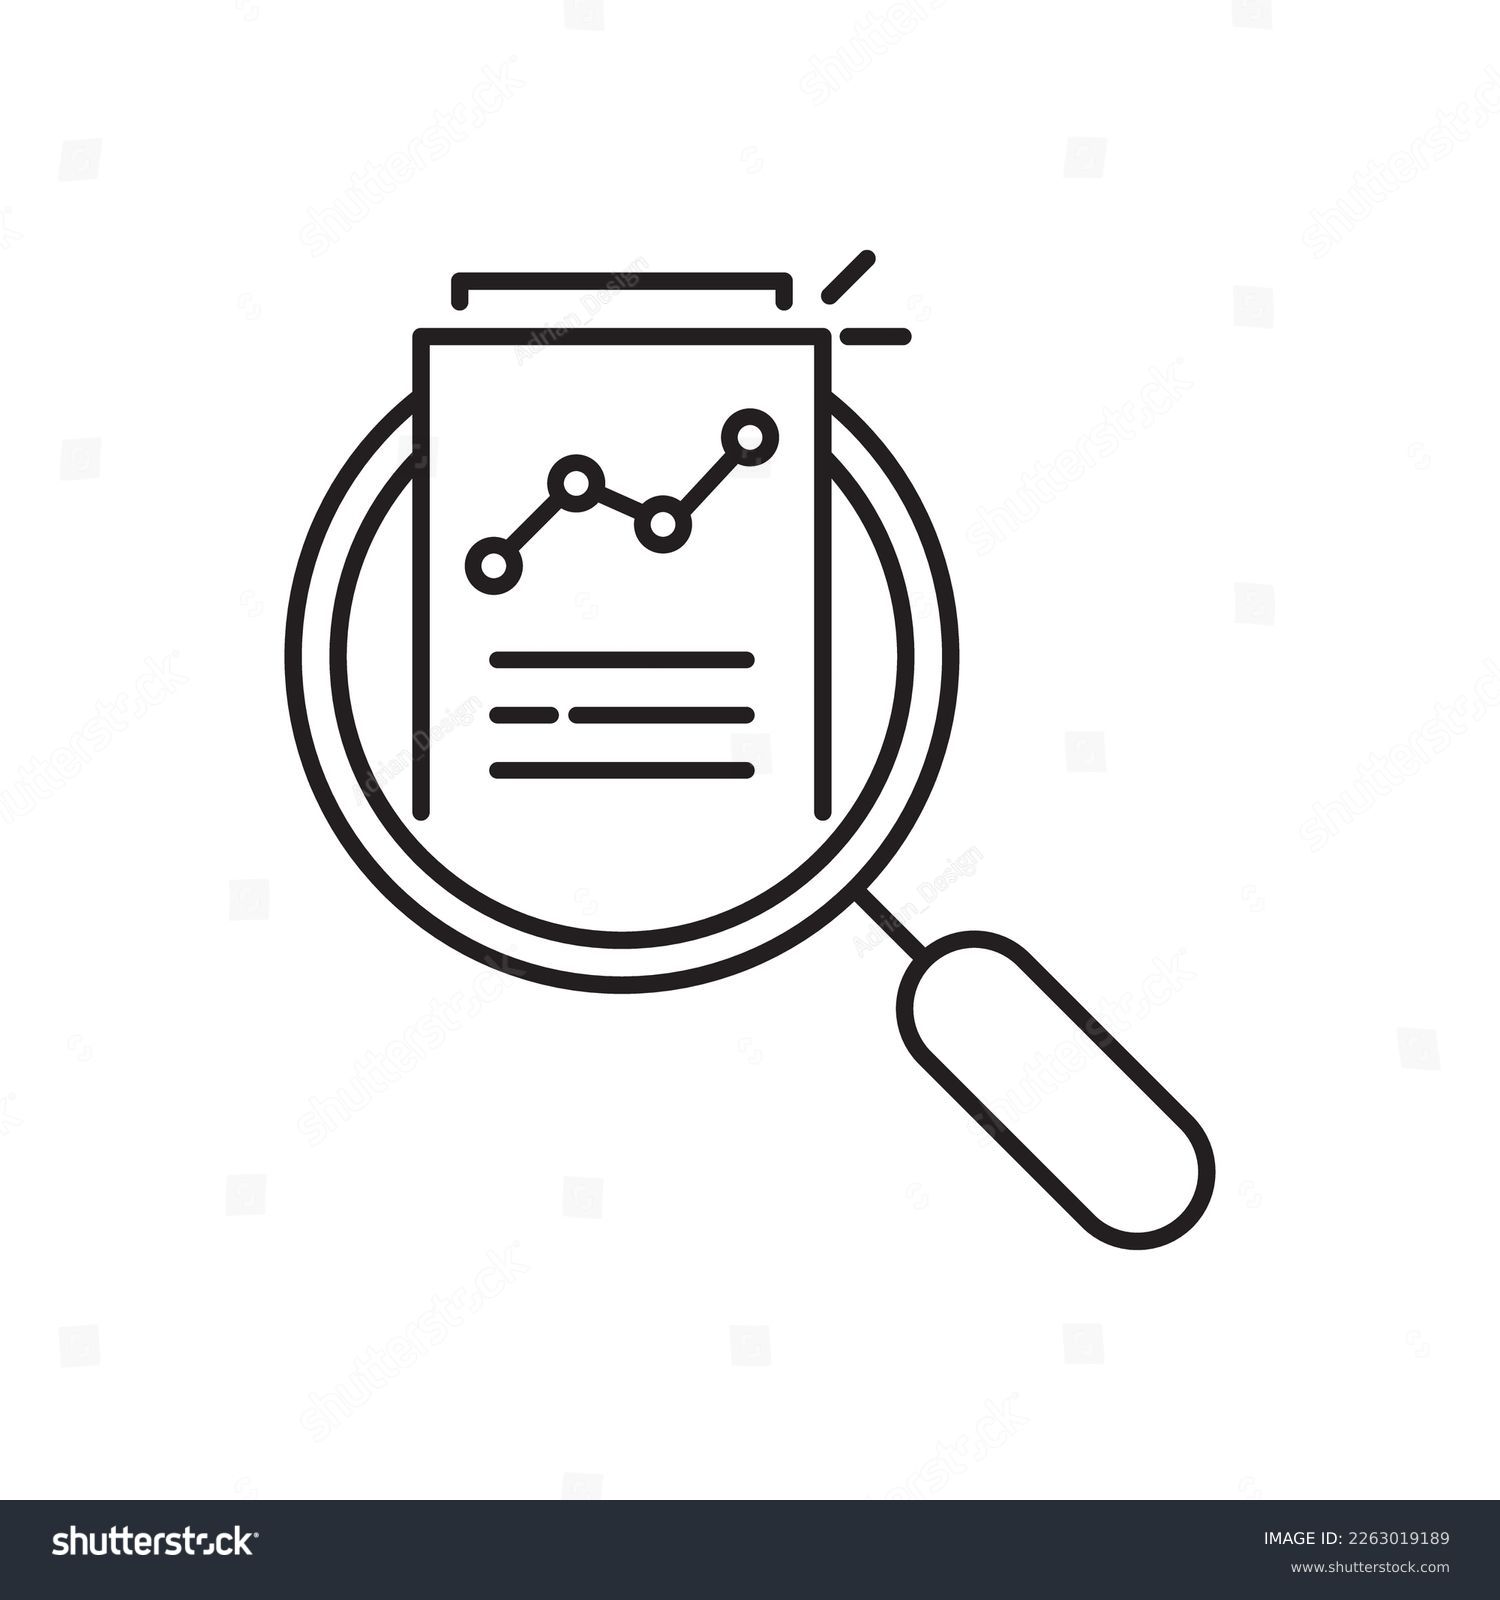 audit and data analysis icon like thin line assesment. linear trend graphic stroke design lineart logotype web element isolated on white. concept of key performance indicator or business visualisation #2263019189